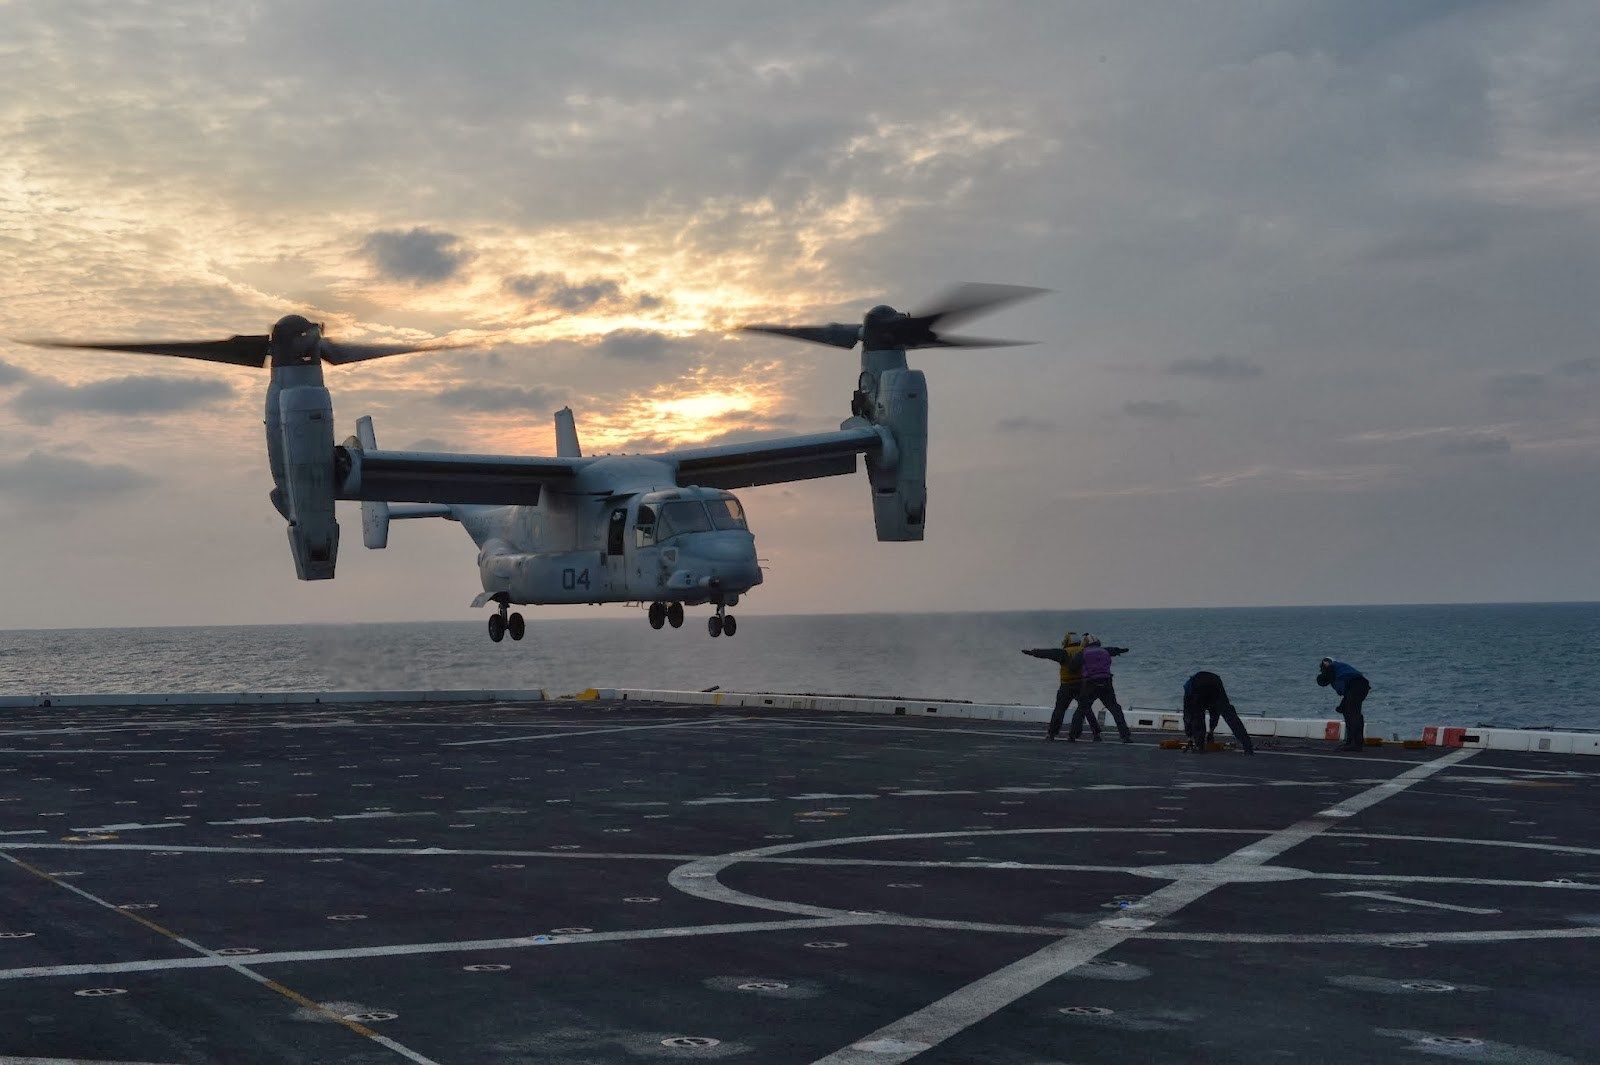 beautiful picture of bell boeing v 22 osprey. Boeing, Osprey aircraft, Osprey